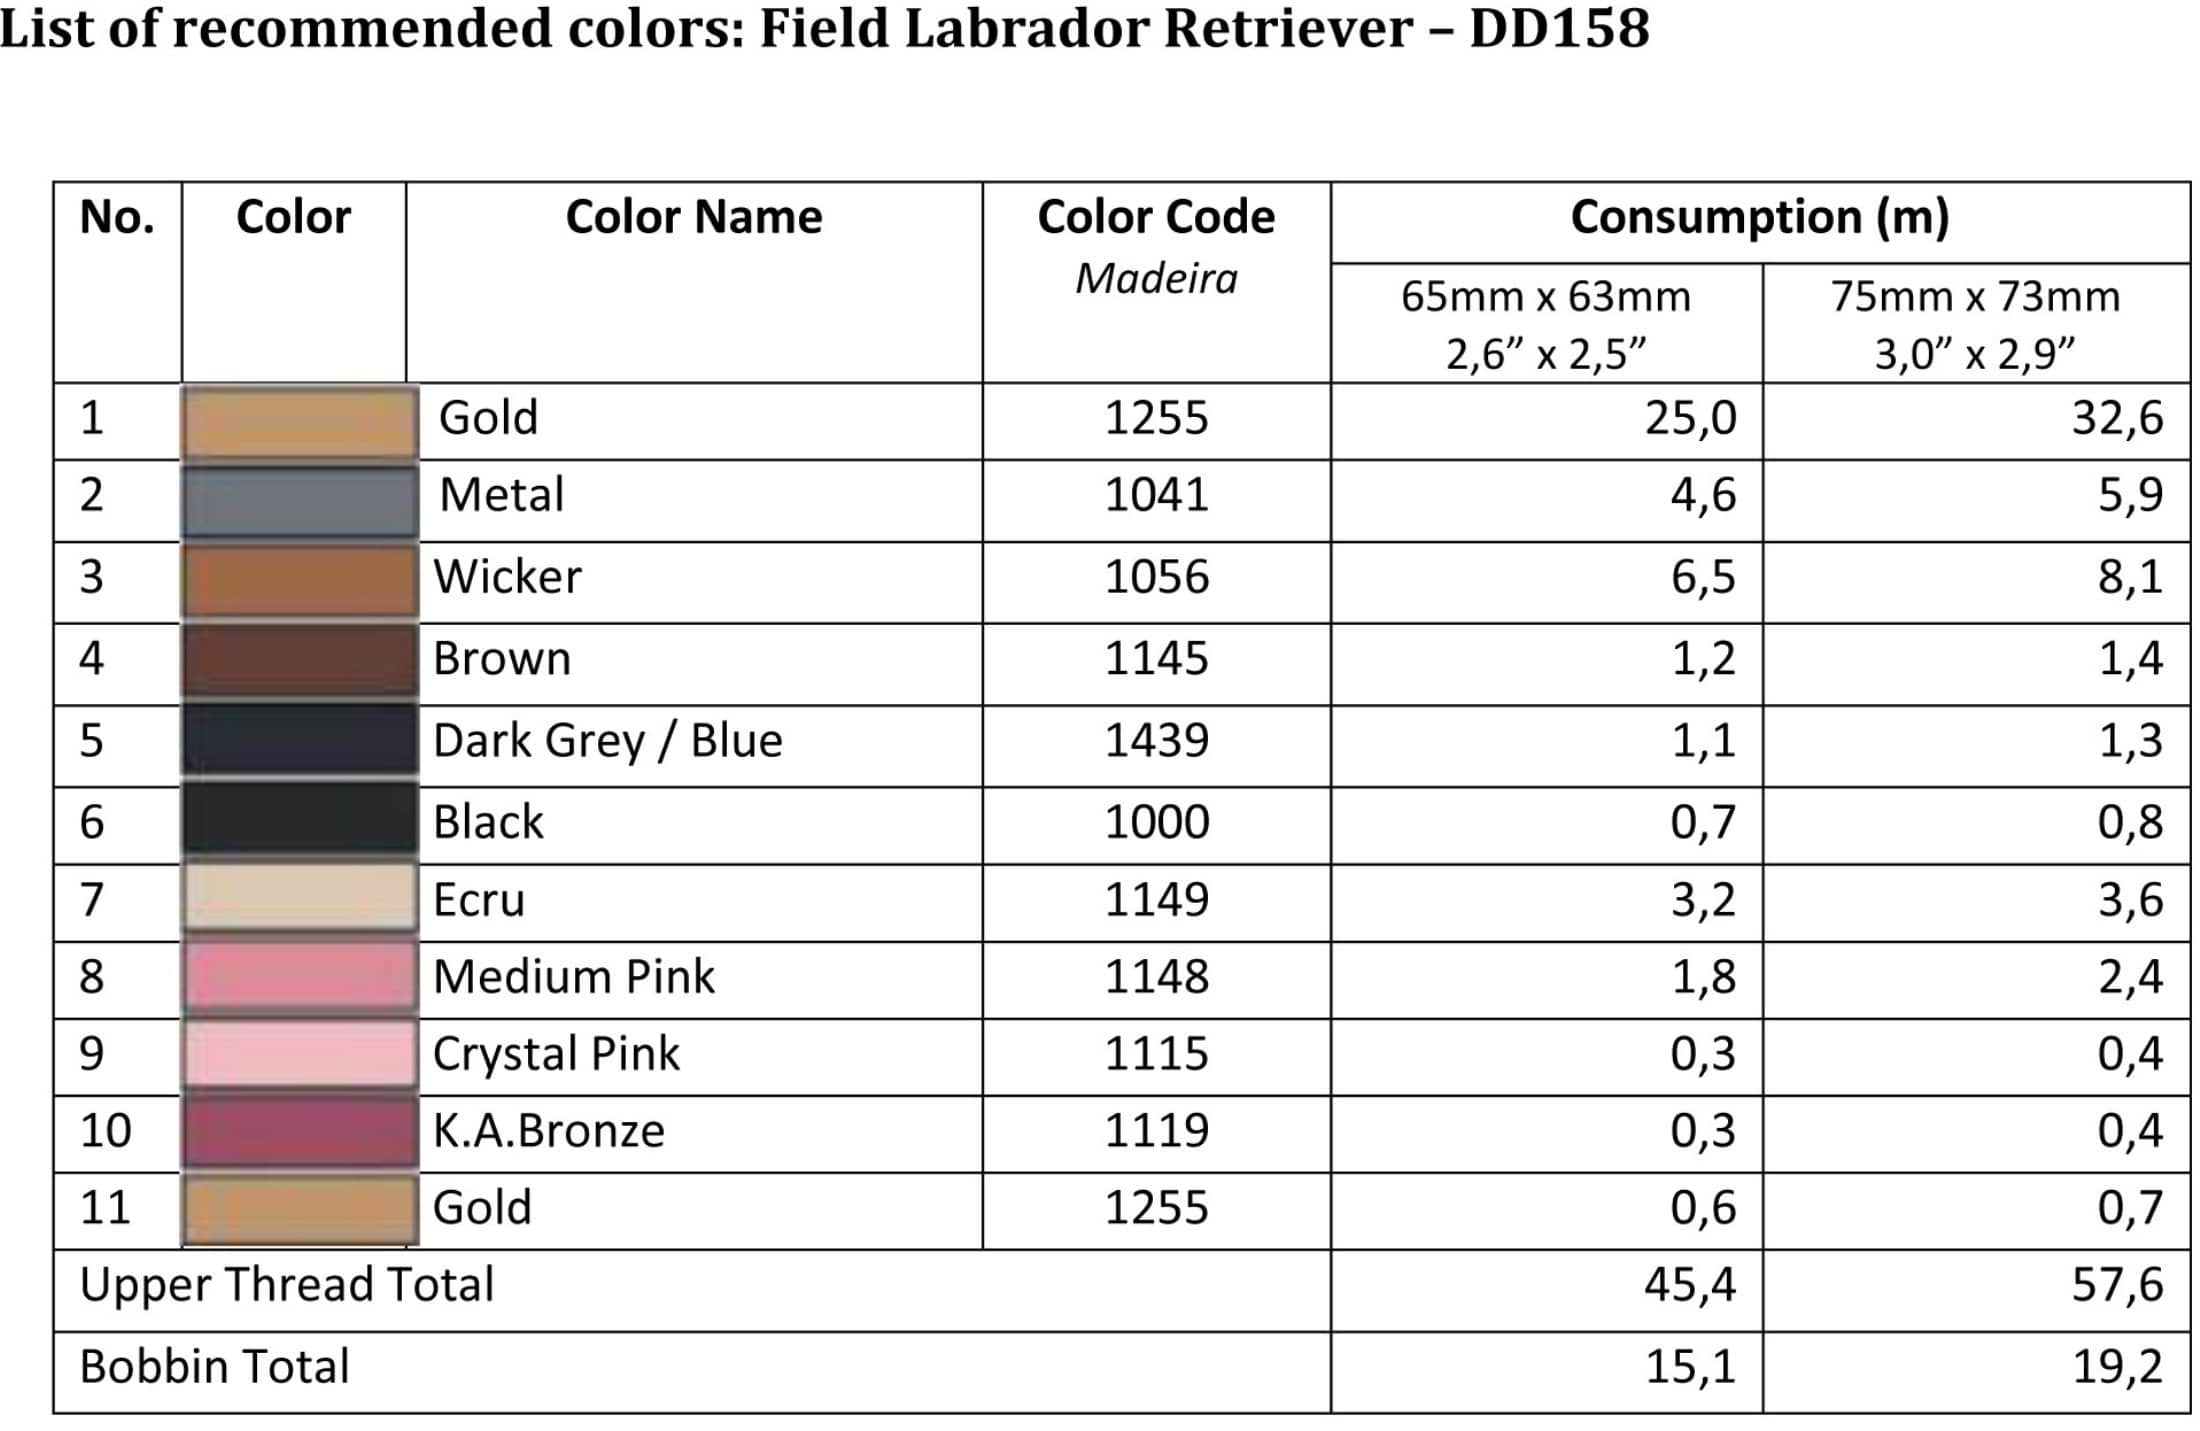 List of recommended colord - DD158